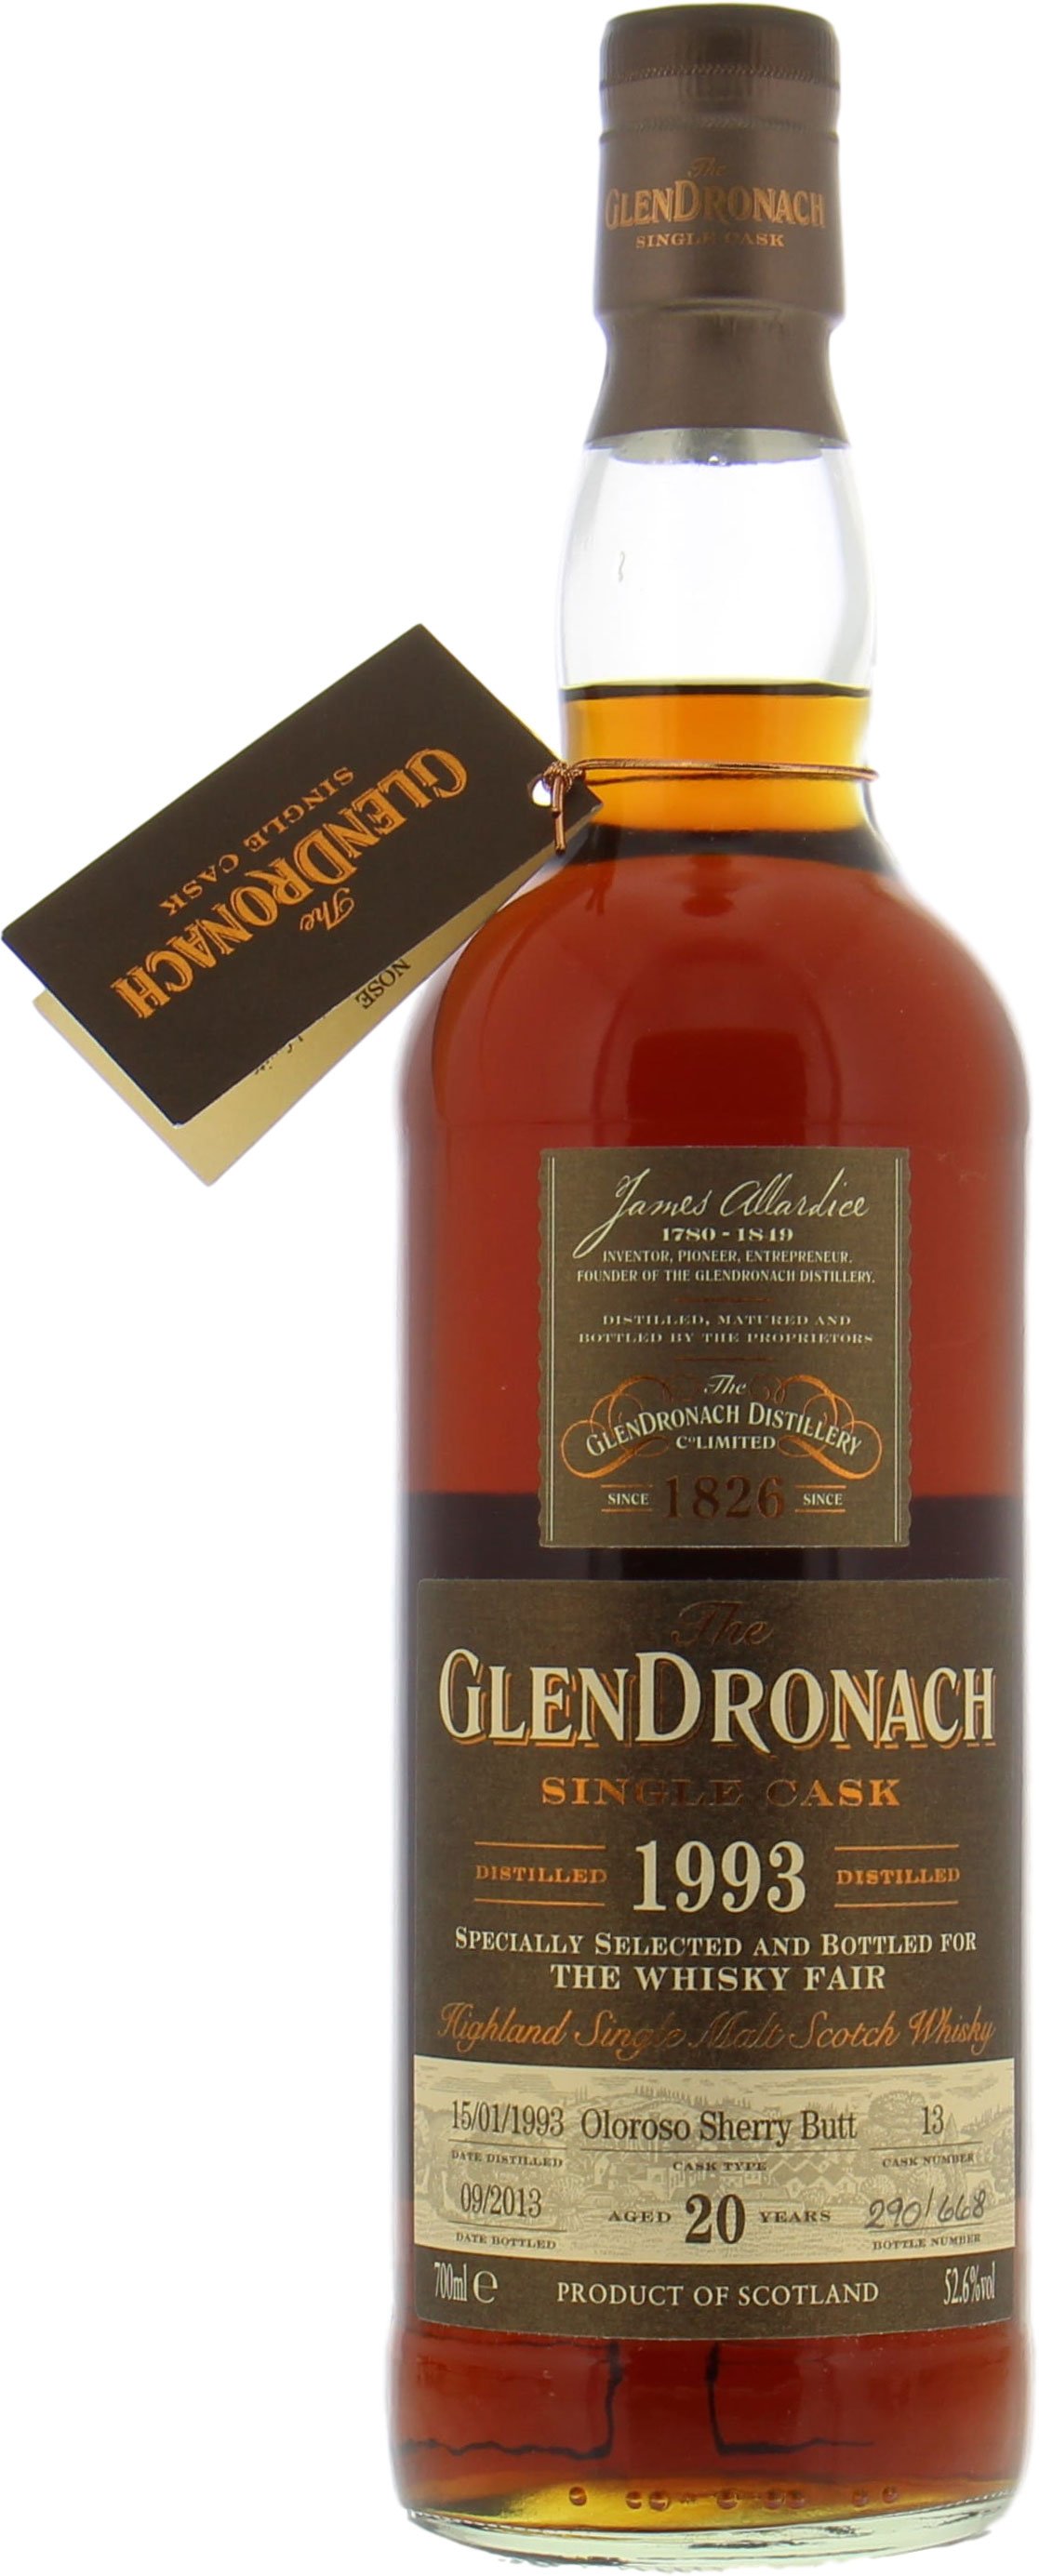 Glendronach - 20 Years Old Cask:13 For The Whisky Fair Germany 52.6% 1993